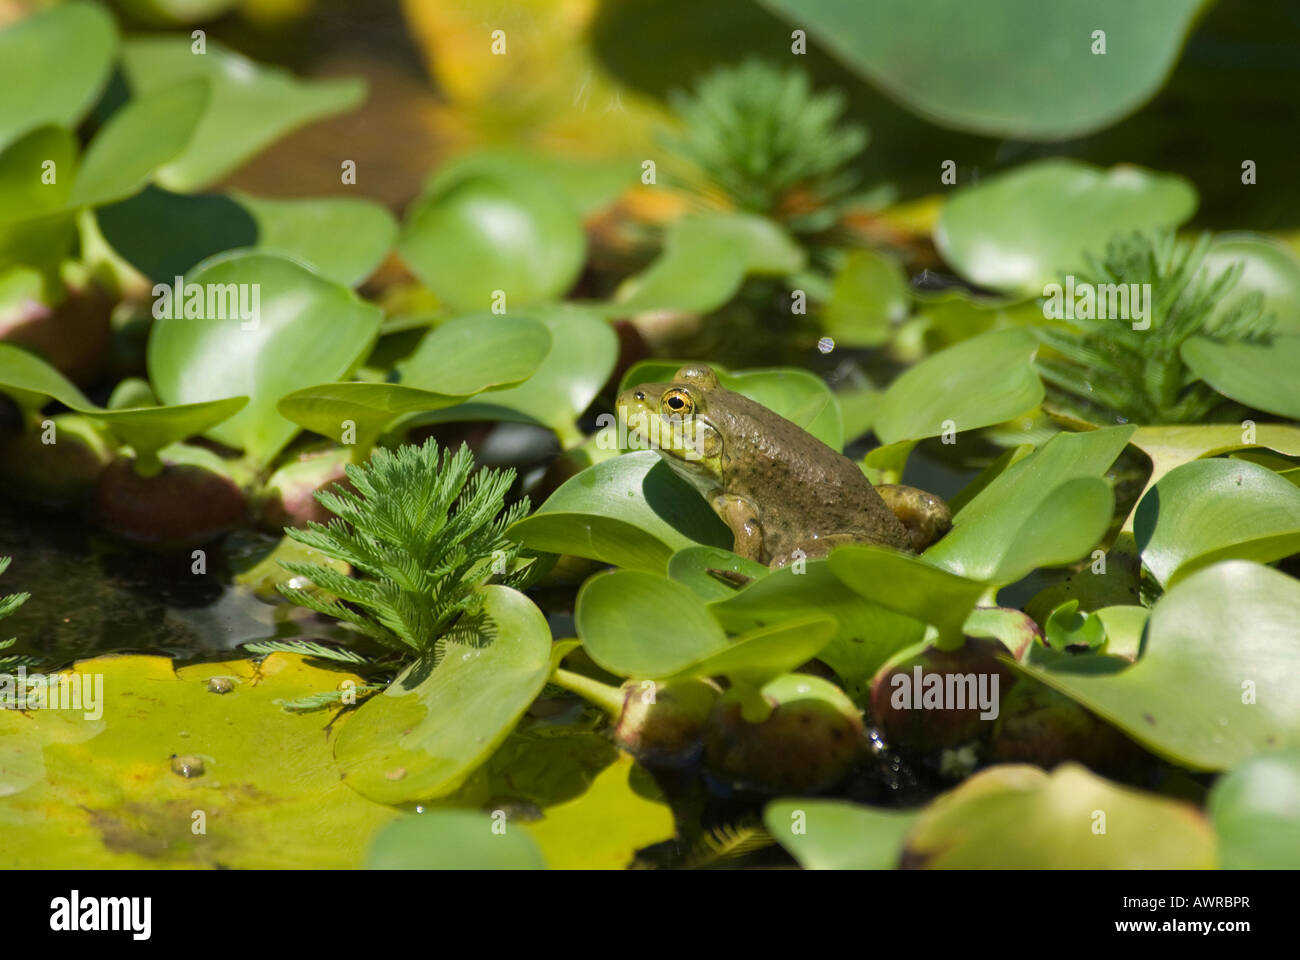 Frog on lilies Stock Photo